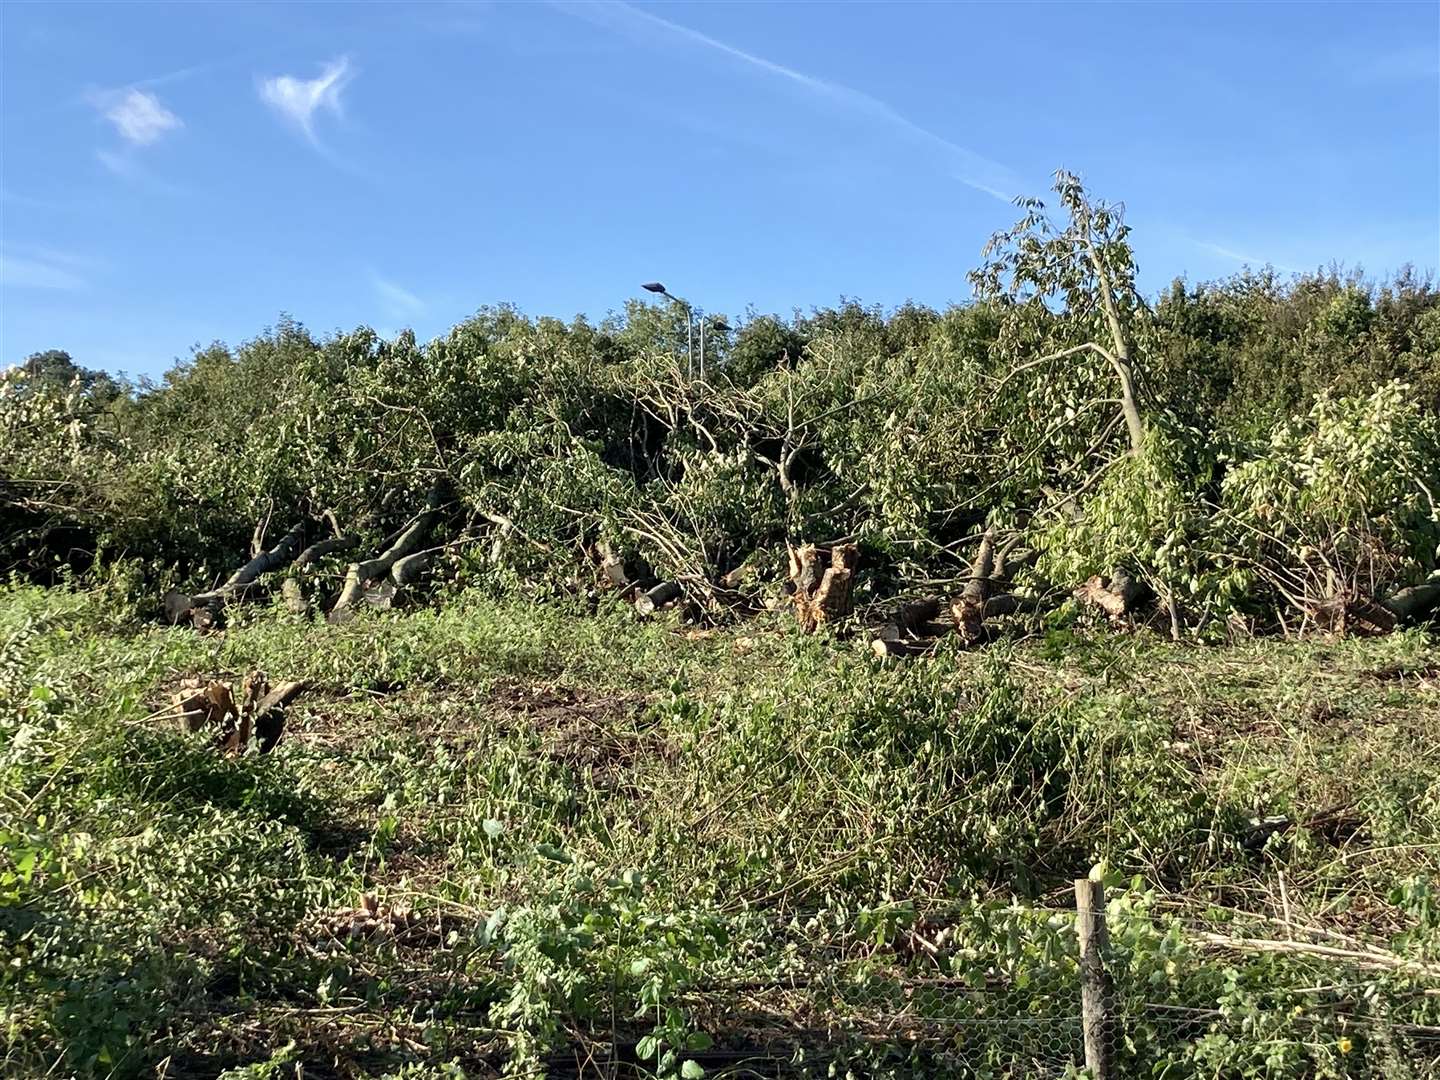 Trees and bushes have been pulled down to clear the site for a new flyover over the Stockbury roundabout at Sittingbourne